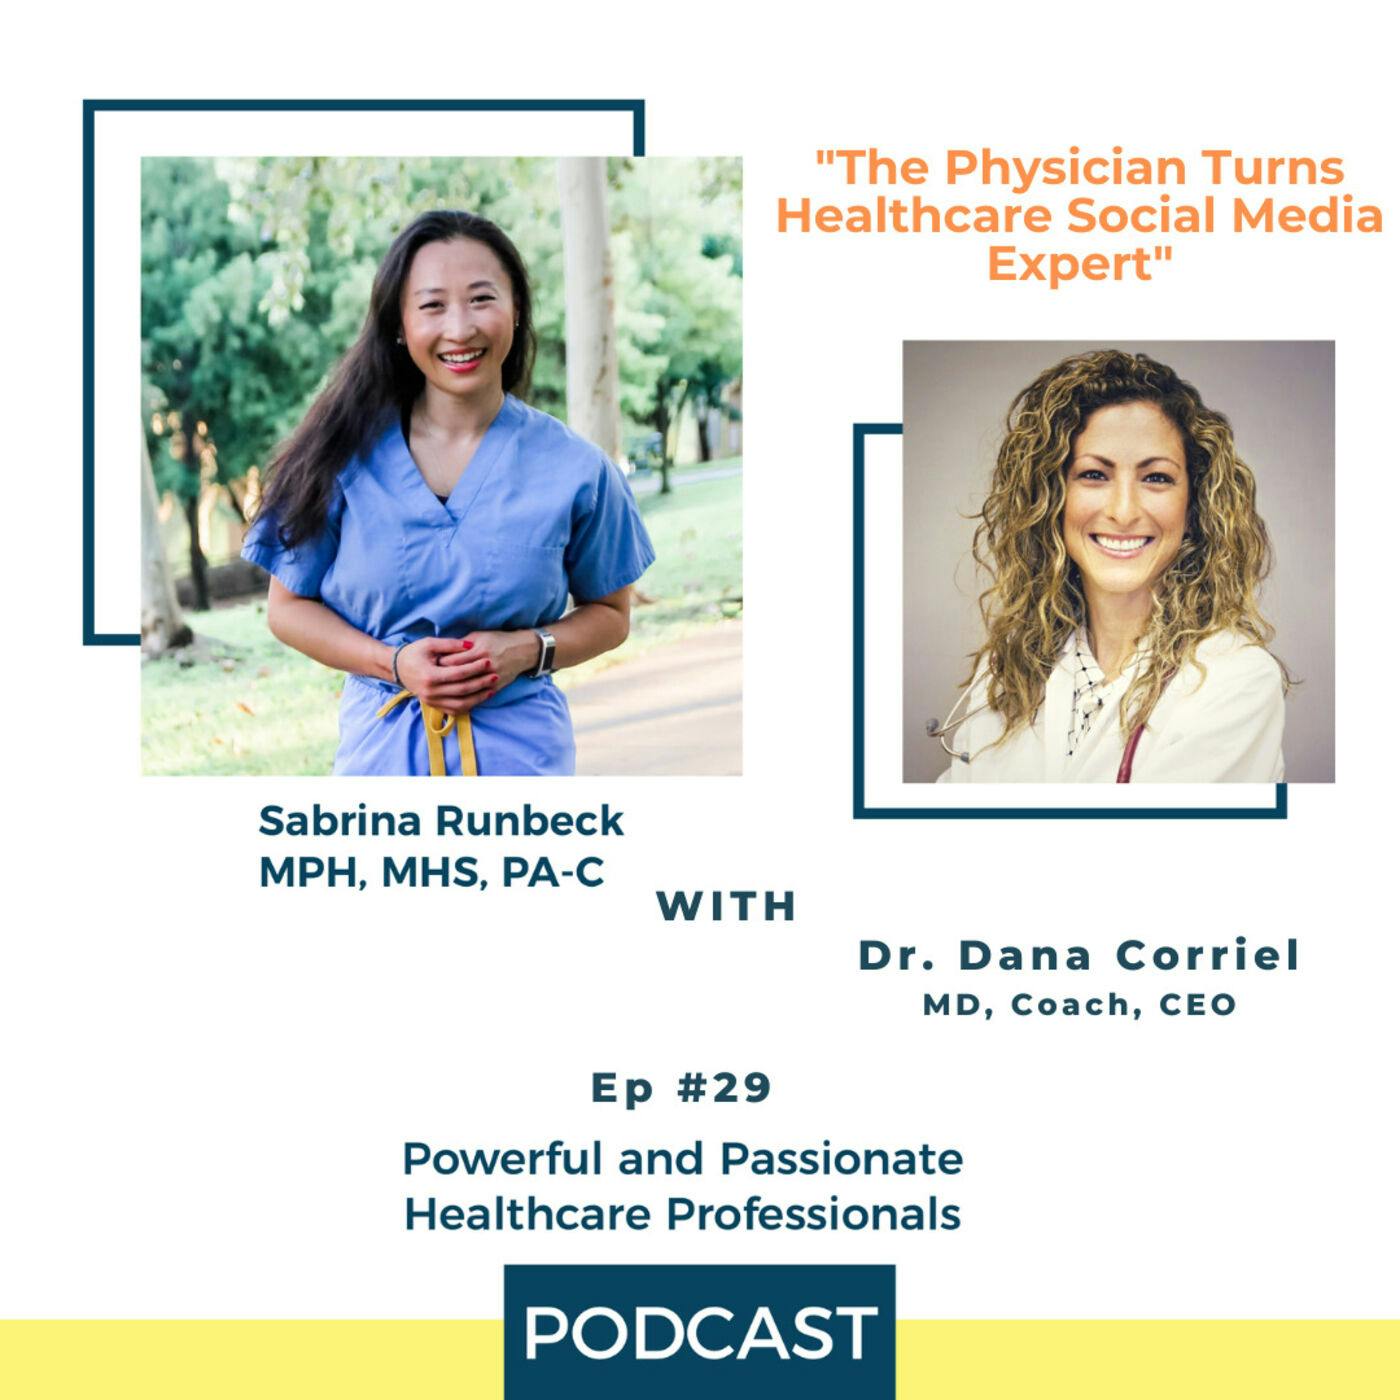 Ep 29 – The Physician Turns Healthcare Social Media Expert with Dr. Dana Corriel